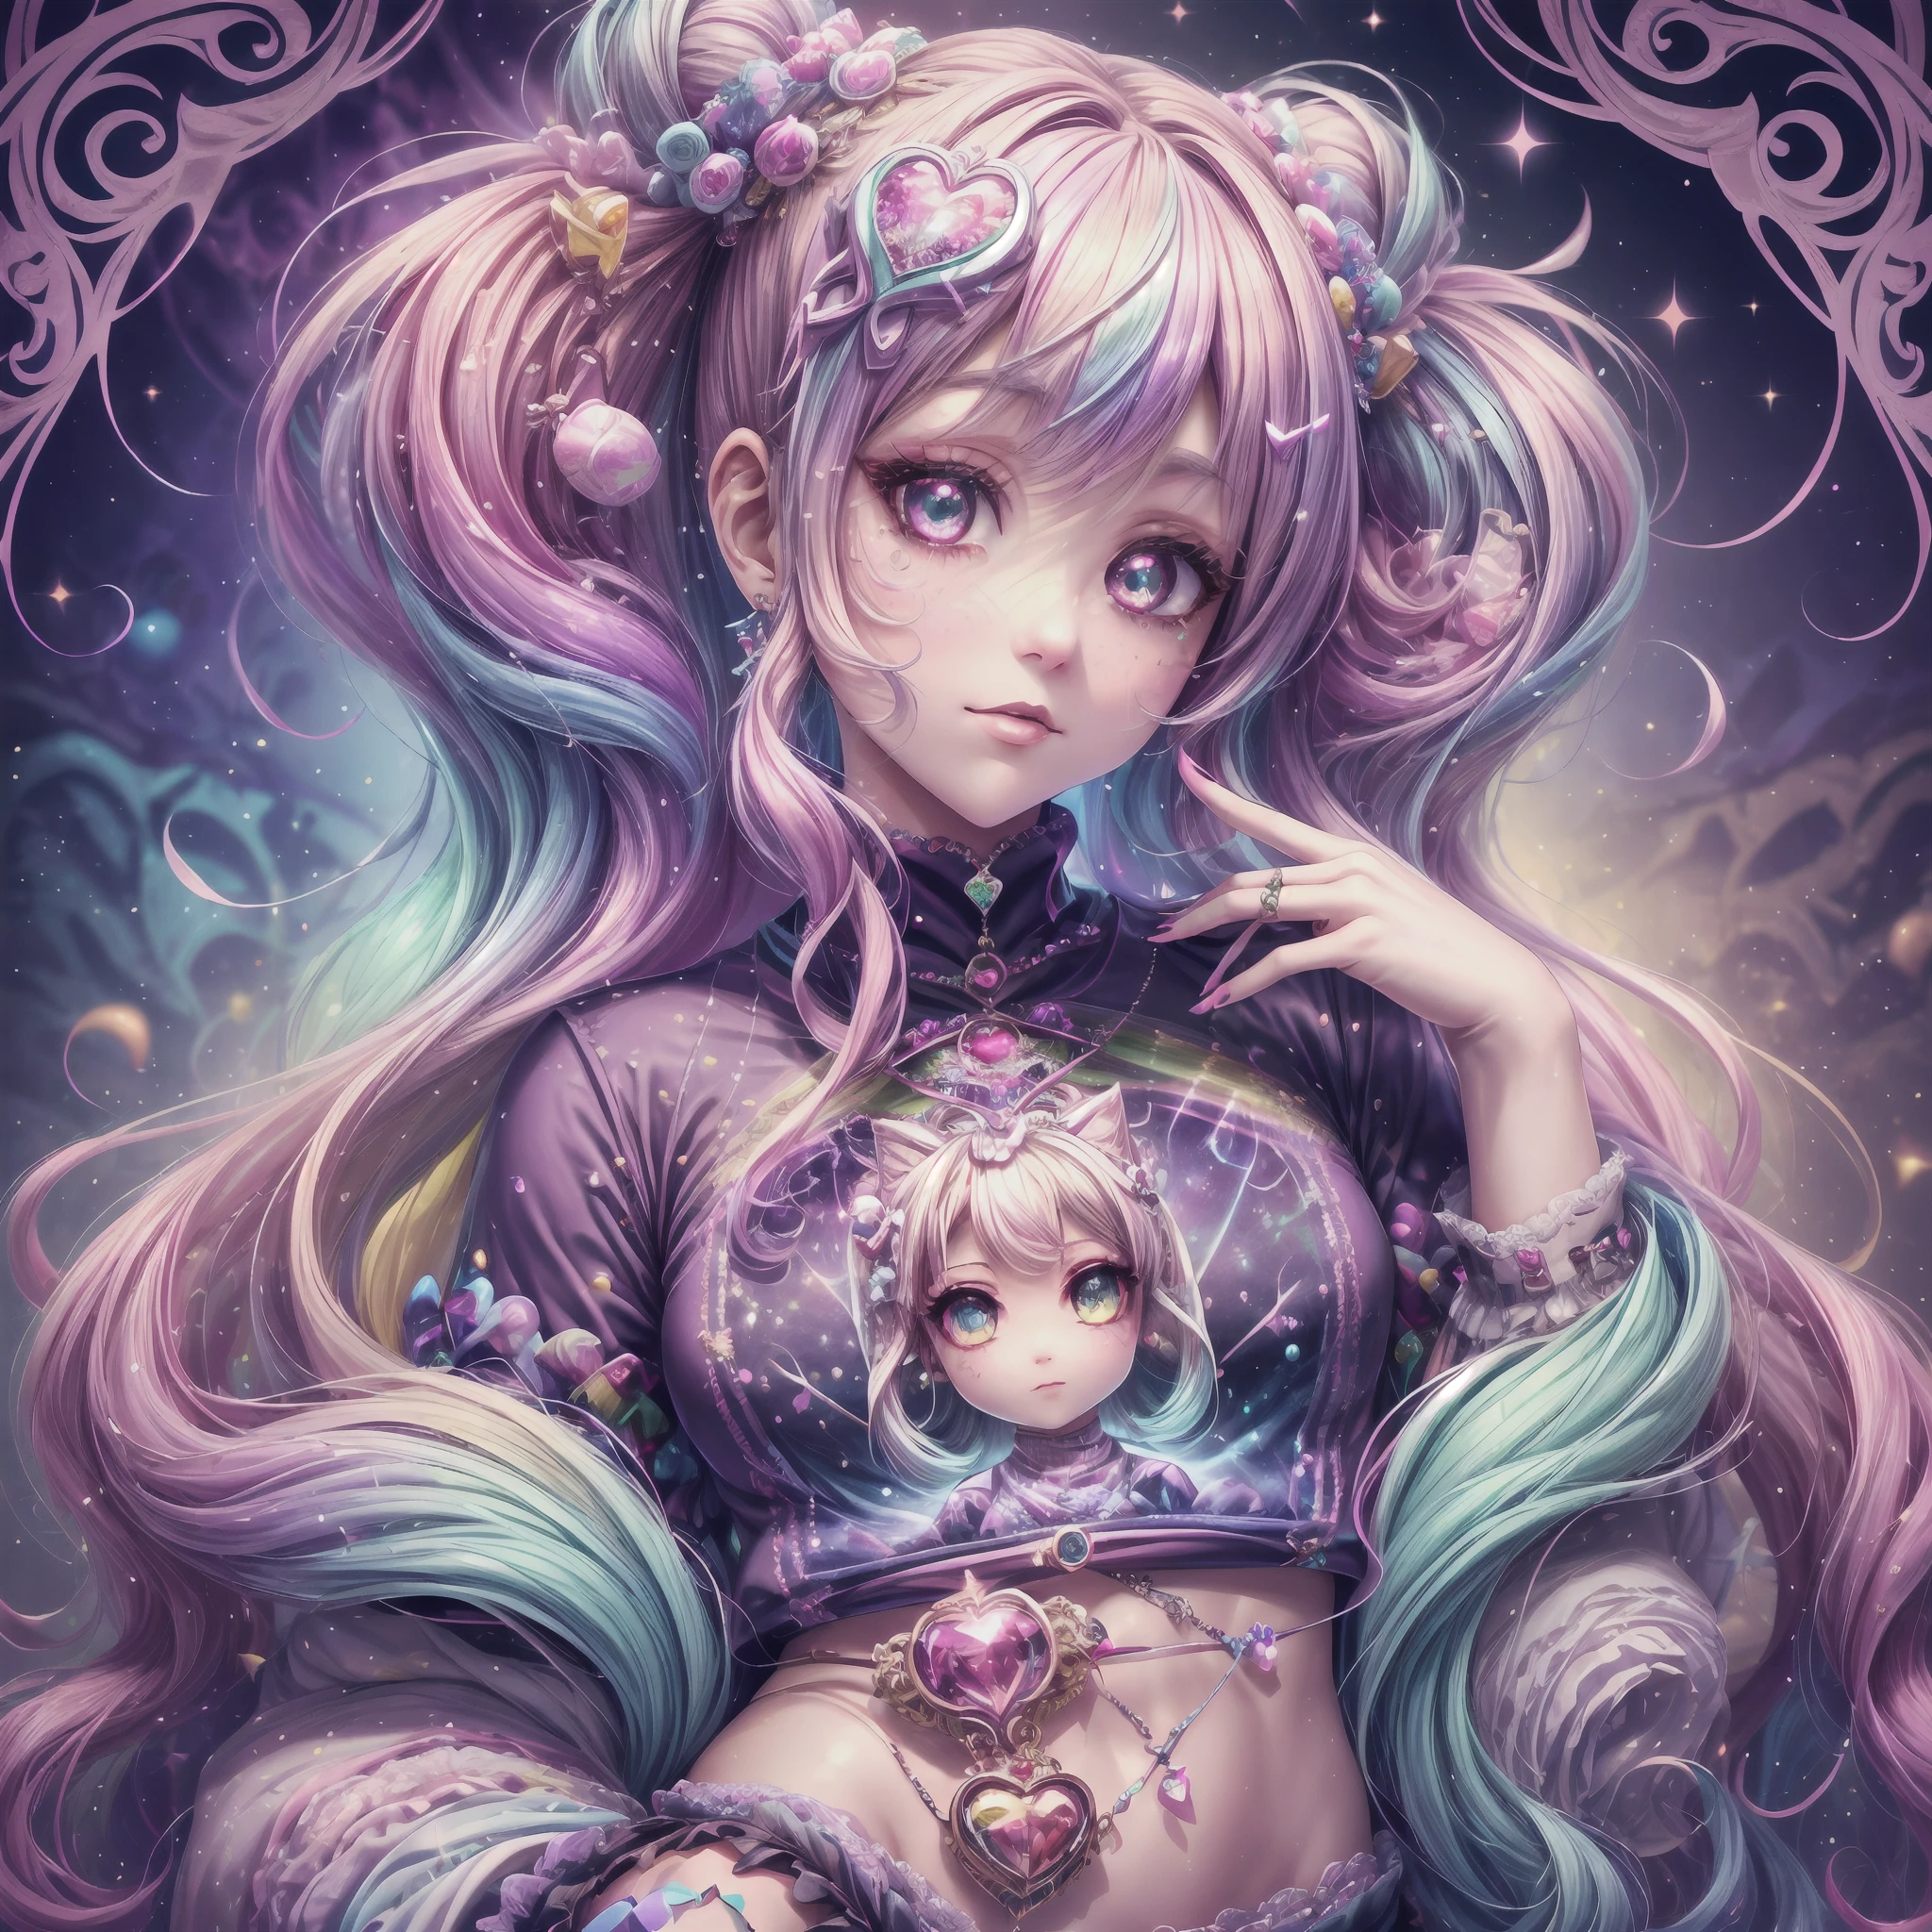 This image should be colorful and euphoric with extreme fantasy elements and very bold colors. Use (((lora:ArcherTurtleneck:1))). Generate a beautiful  nymph with ornate and highly detailed Decora Harajuku fashion aesthetics on an interesting Harajuku street background. Her head, torso, and hips are in frame. The nymph should have a mature face with a lot of character and visual interest. Include beautiful eyes, highly detailed eyes, extremely detailed eyes, intricate eyes, 8K eyes, macro eyes. Pay close attention to intricate facial details and realistic eye shading. Include bright lisa frank rainbow colors. ((Include many realistic fantasy and rainbow Harajuku and decora details)). Clothing should be very detailed and intricate in the style of extravagant Harajuku decora street fashion with a heavy emphasis on rainbow colors. Her shirt should contain contrasting textures, colors, and patterns (((lora:ArcherTurtleneck:1))). Her pants should be highly detailed and contain contrasting textures, colors, and patterns. The image is the highest quality possible, with rich colors and an extremely high resolution. Consider influences like the artwork and colors of Lisa Frank. Utilize bright ambient lighting and dynamic composition to enhance a feeling of happiness and ((euphoria)). The image should contain shimmer, phantasmal iridescence, crystals, and bumps. (((lora:ArcherTurtleneck:1))). (((Include many decora fashion accents.)))